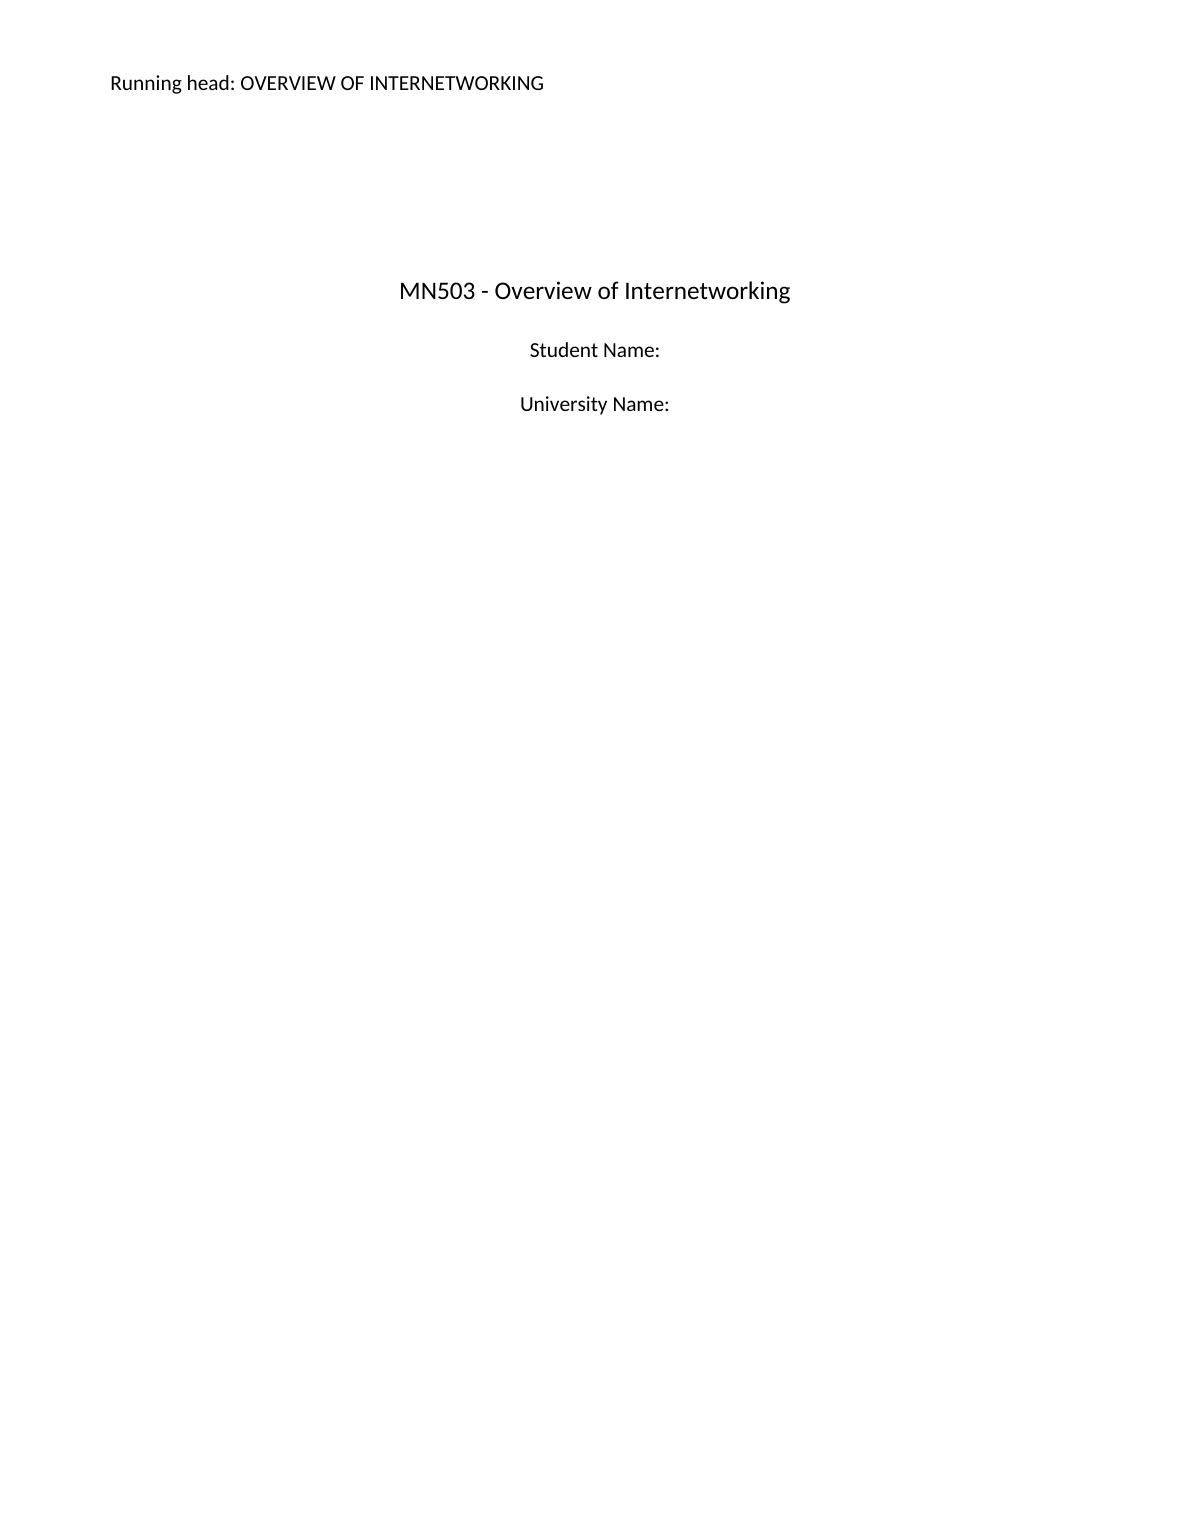 MN503 Overview Internetworking Assignment_1